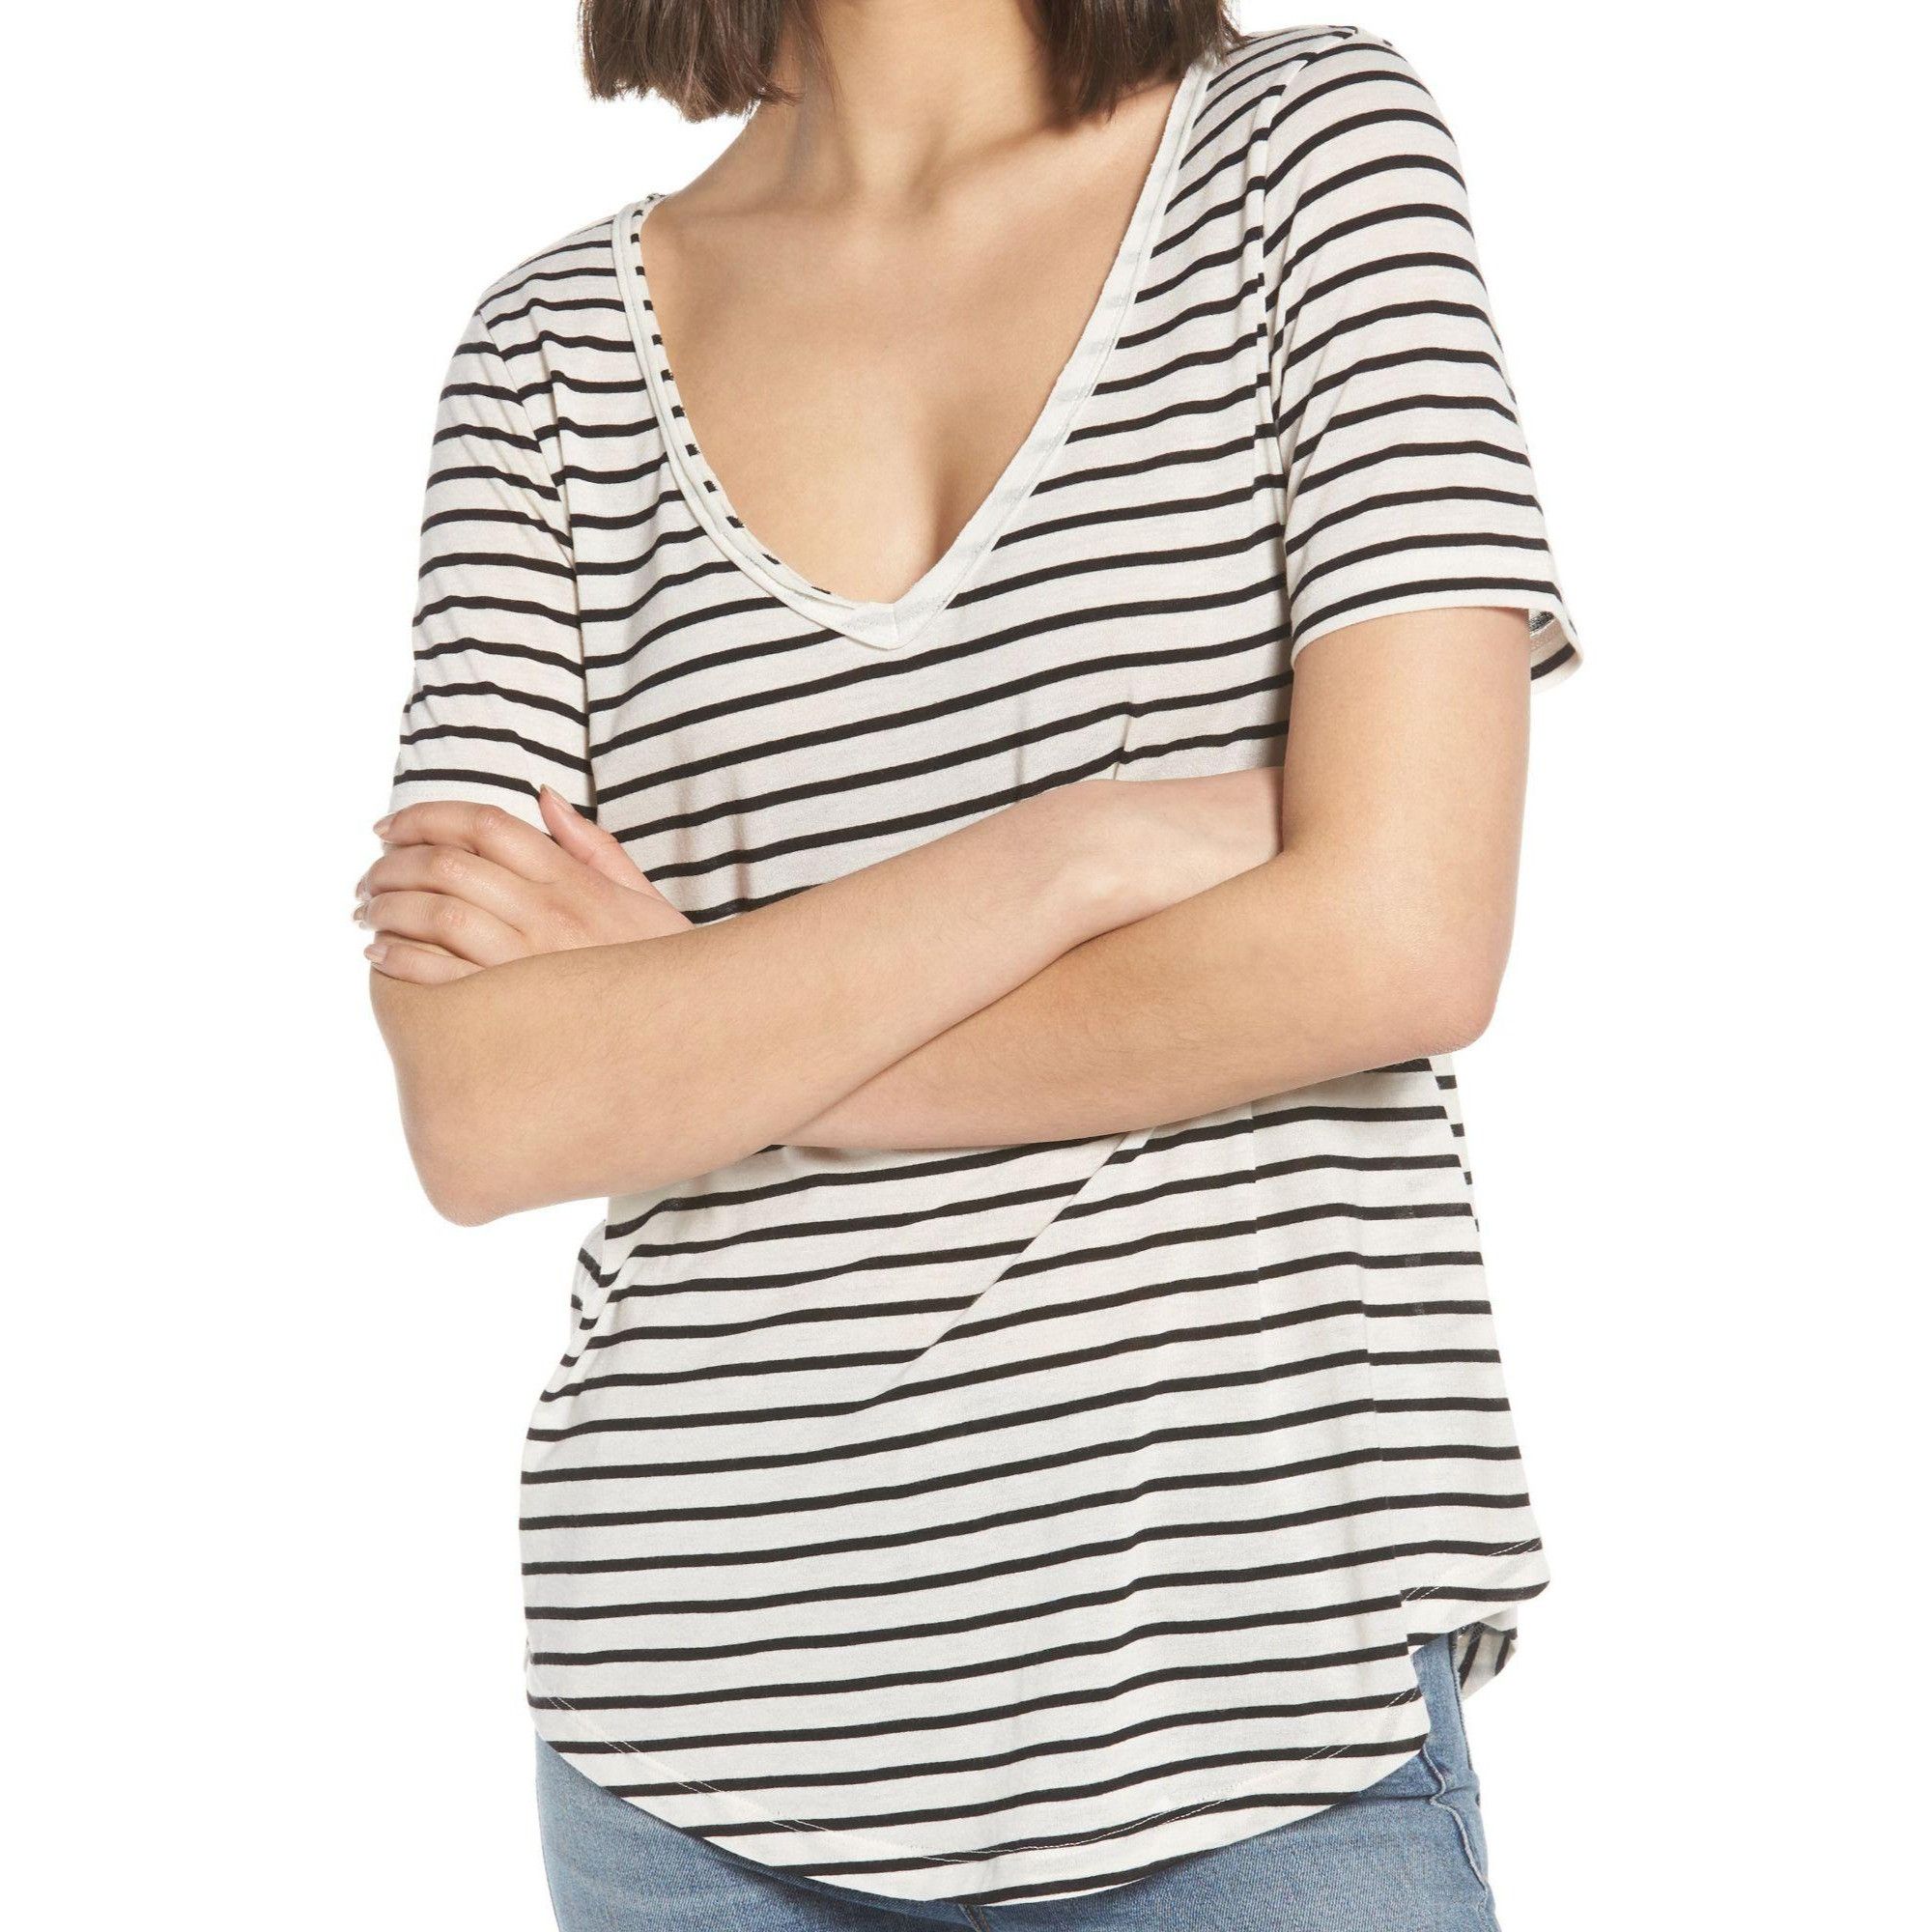 BP bp white ivory black striped raw edge v-neck tee extra small Size XS / US 0-2 / IT 36-38 - 1 Preview